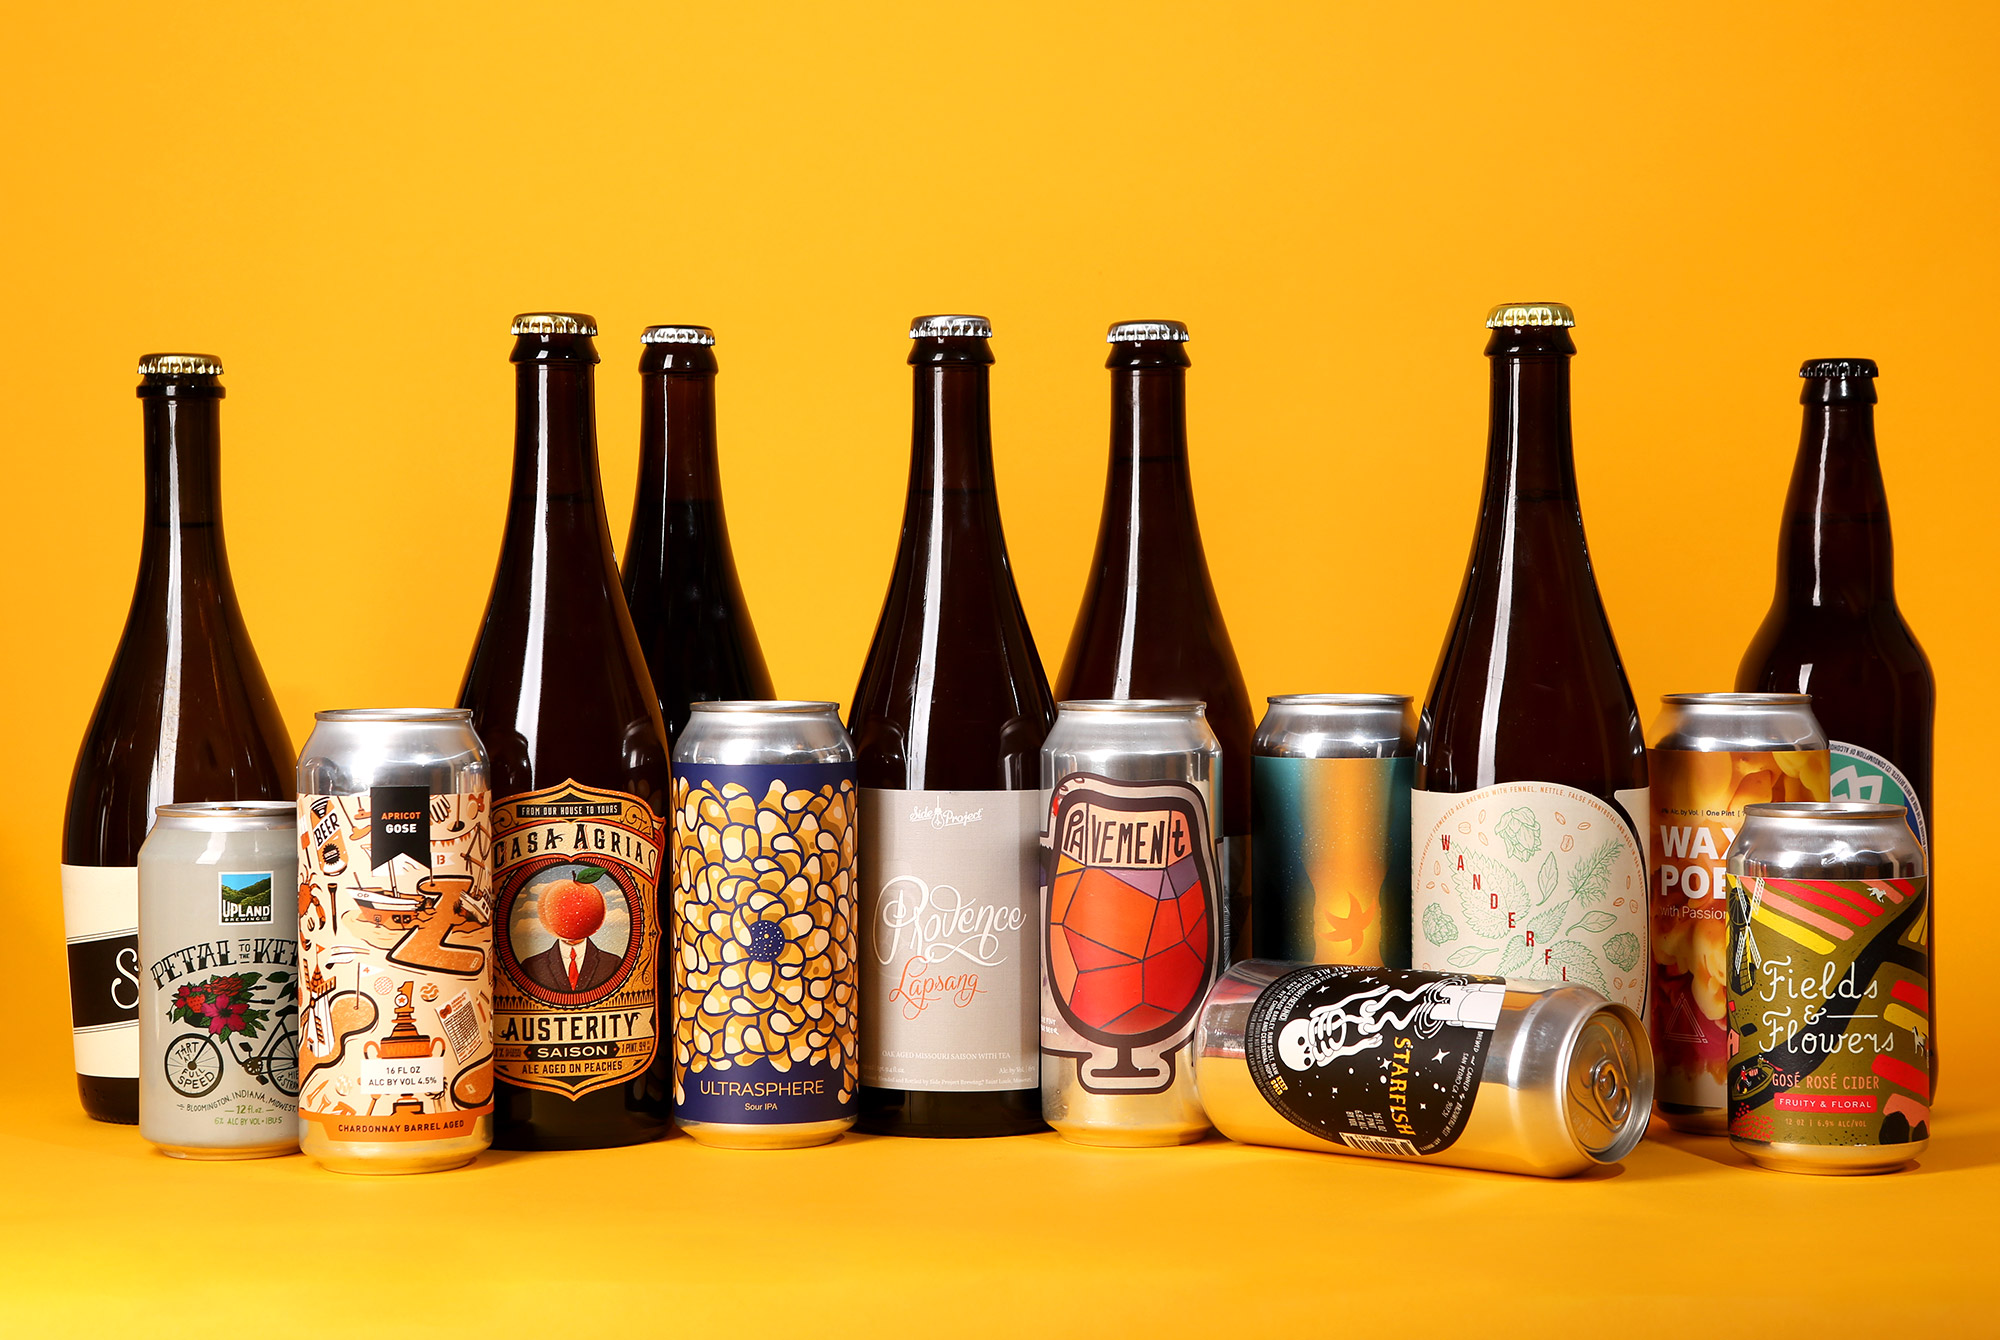 The 20 Best Beers for Spring 2018